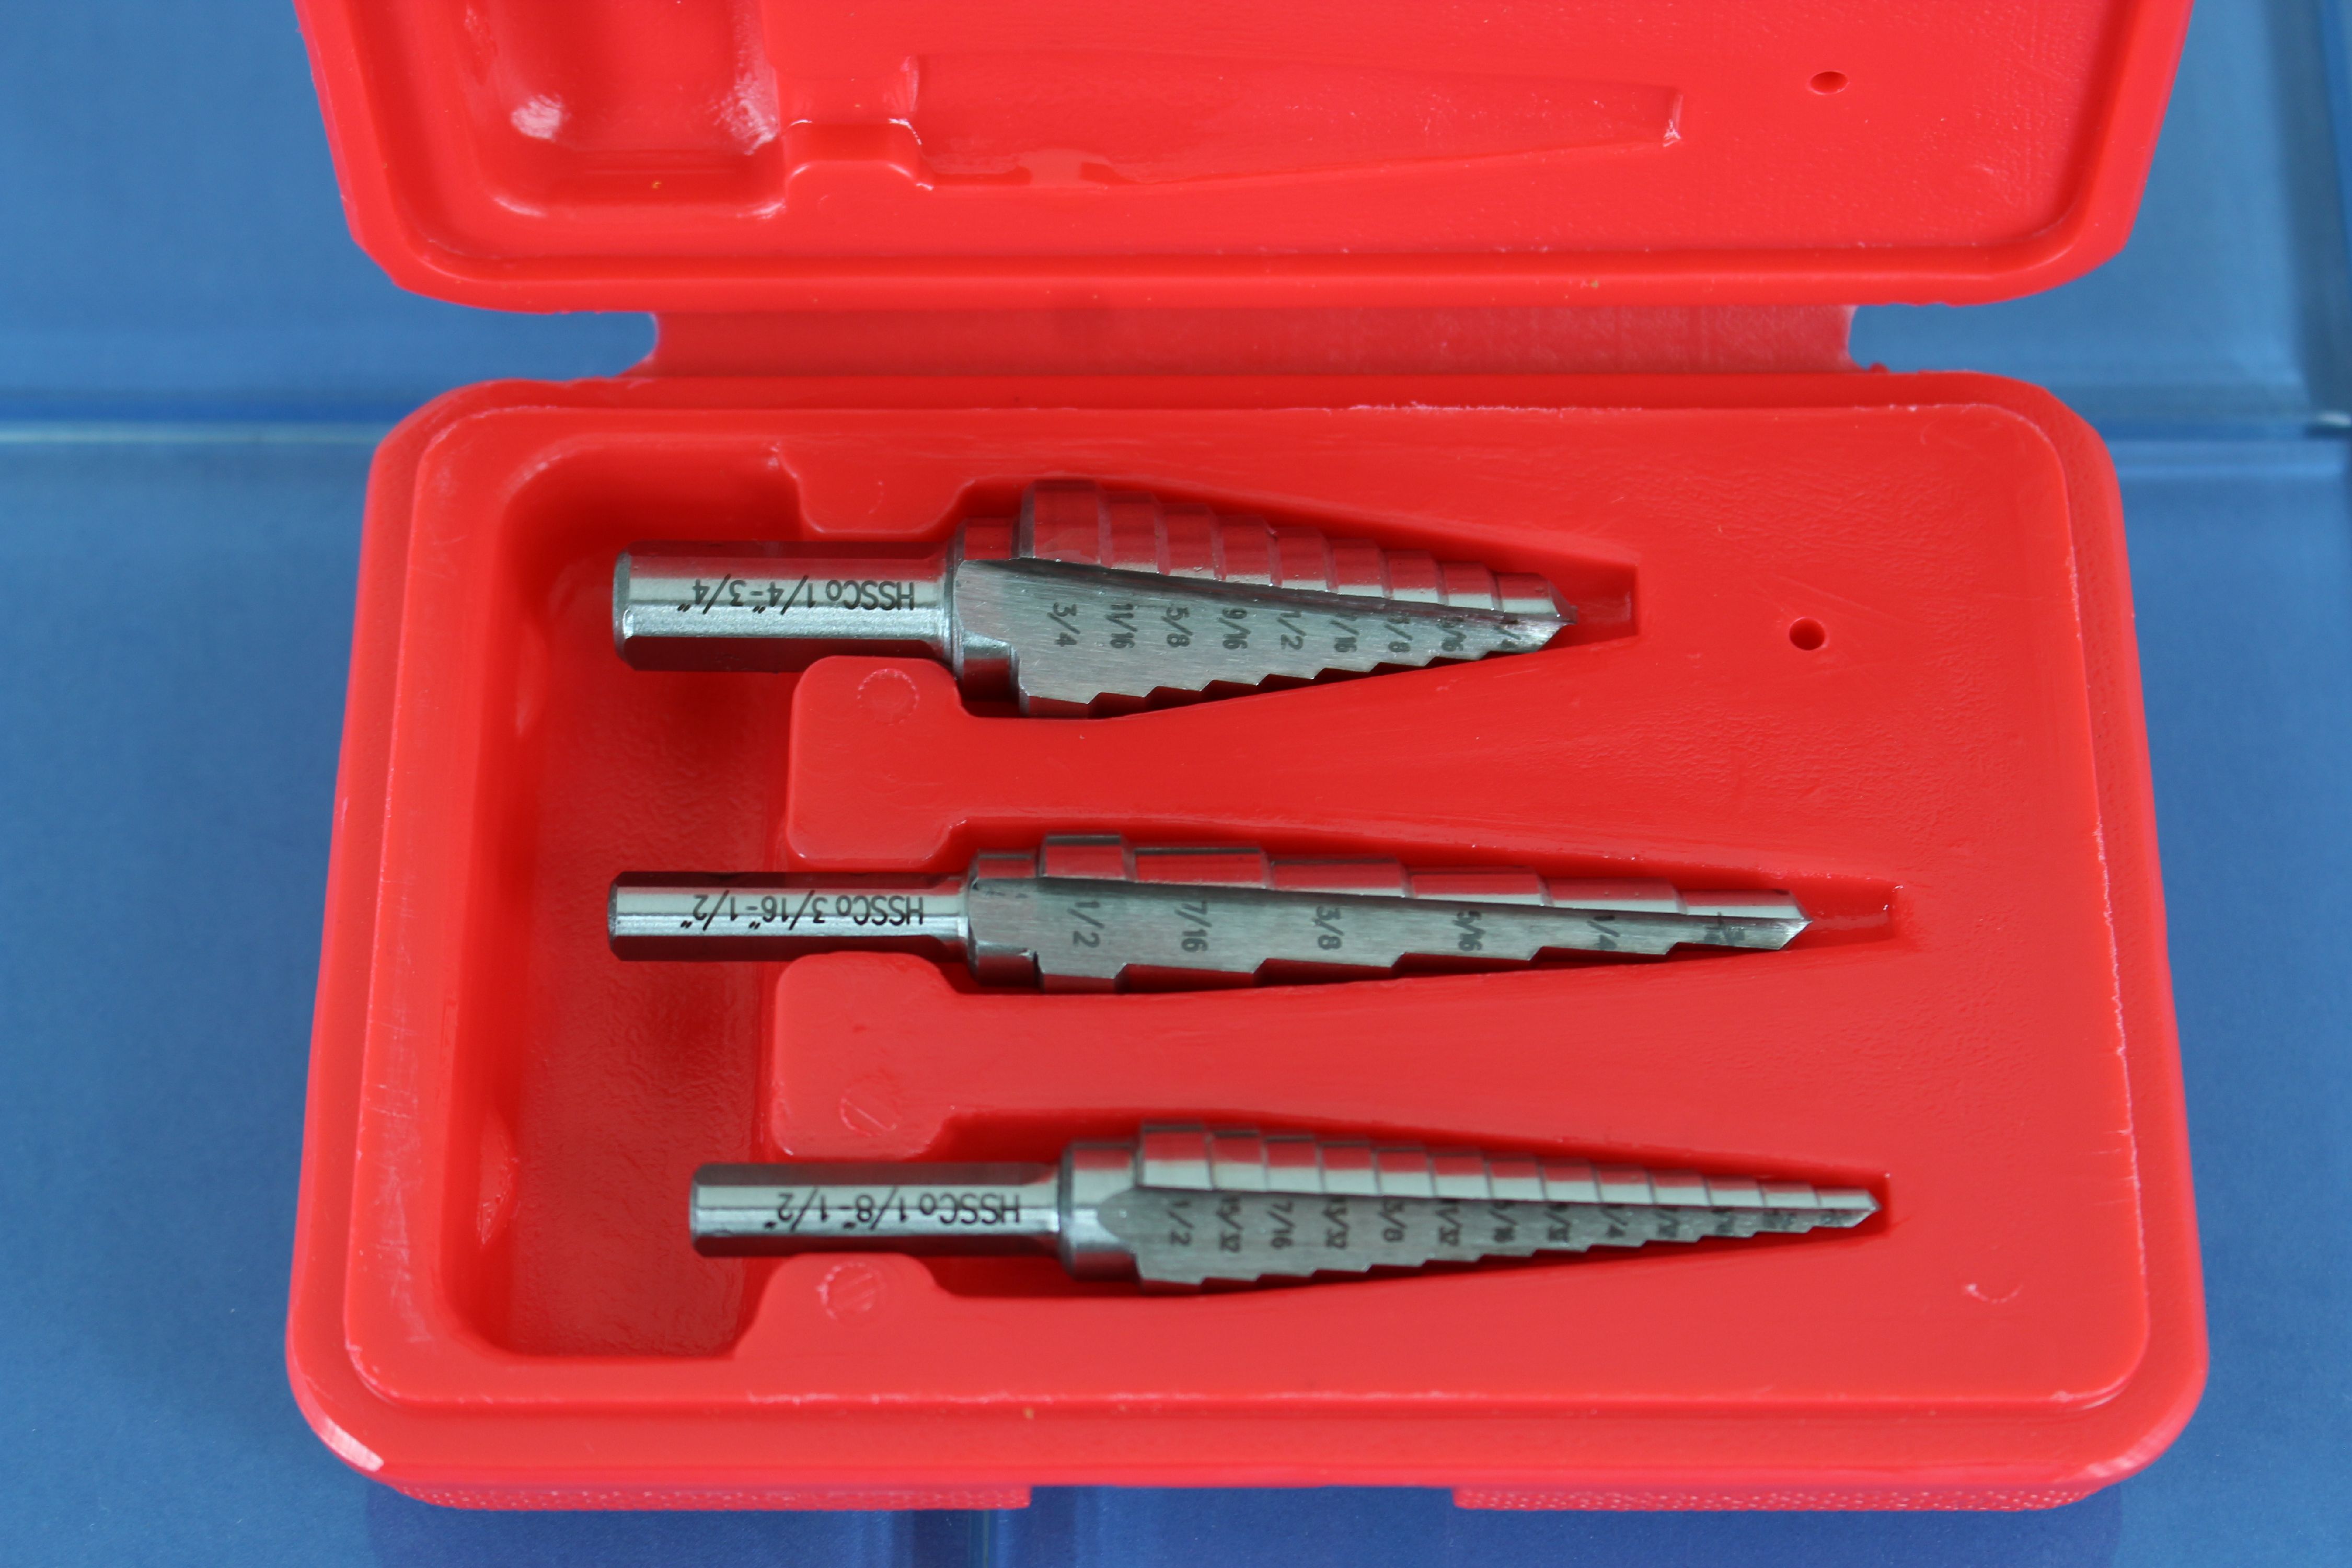 TEMO 3pc M35 Cobalt HSS Step Drill Set Two Flute Total 28 Sizes (3/16"-1/2" 6 step, 1/4"-3/4" 9 step, 1/8"-1/2" 13 step) - image 1 of 3